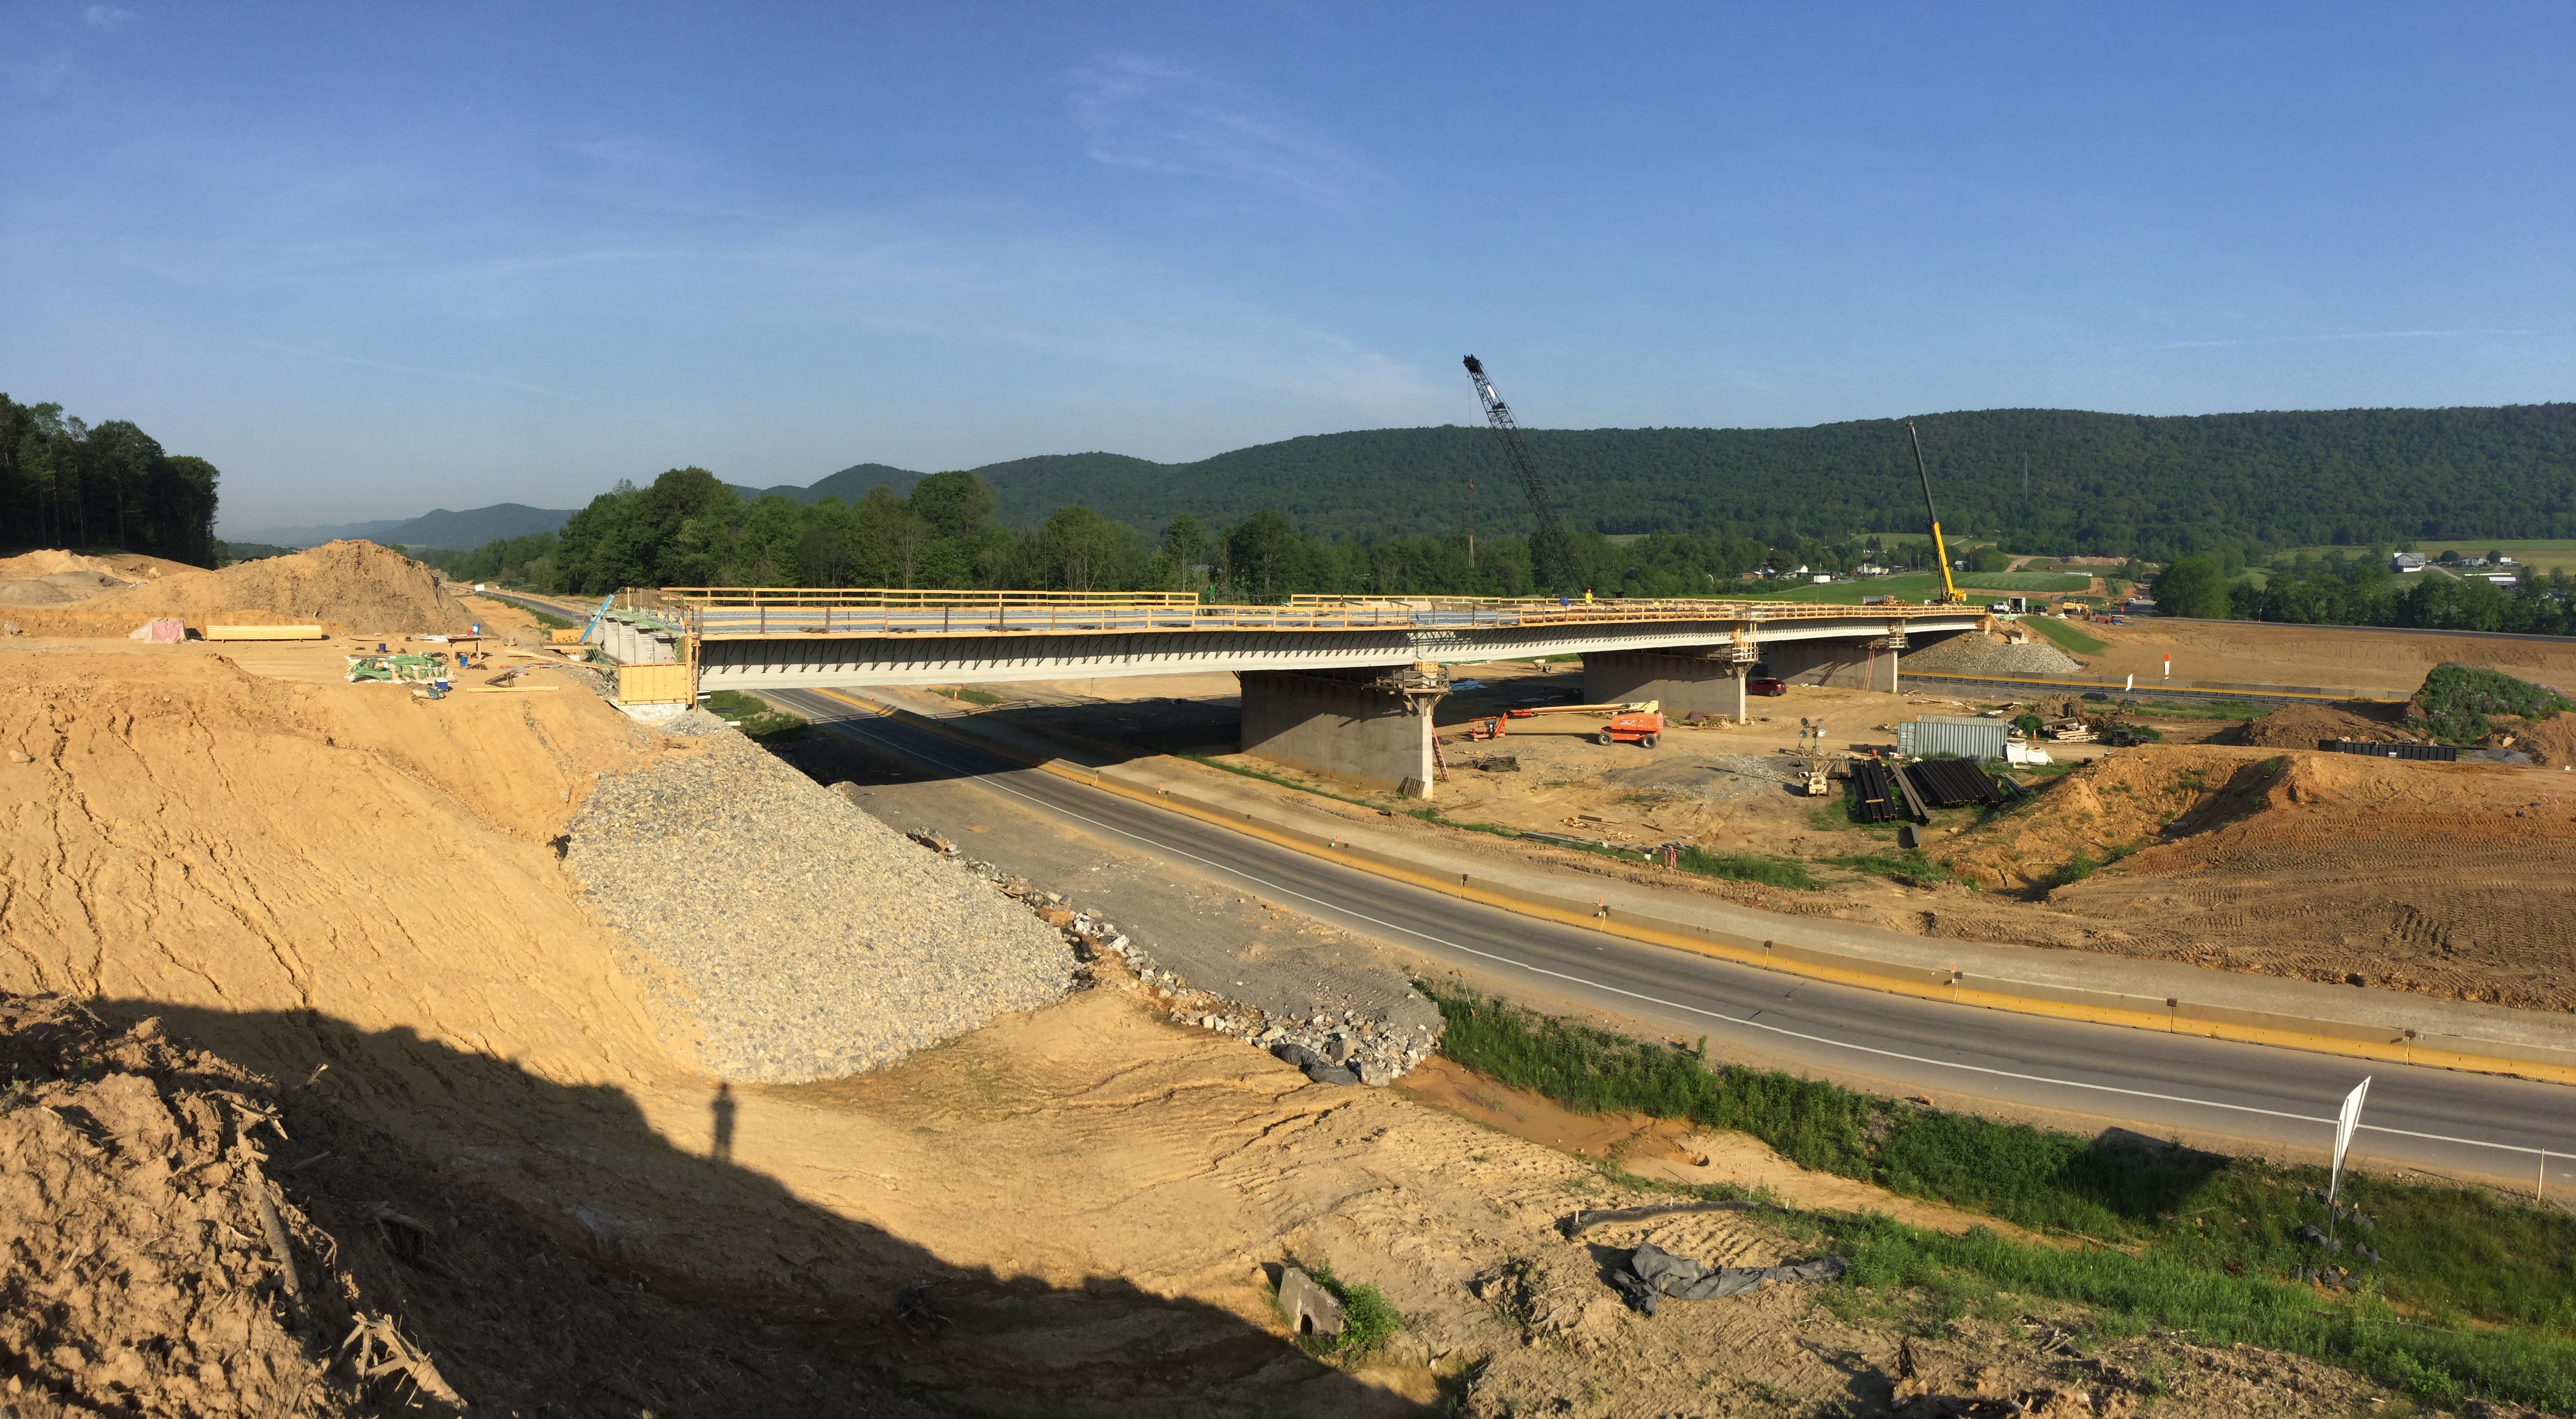 Panoramic view of a bridge crossing a roadway with tan dirt mounds on either side.